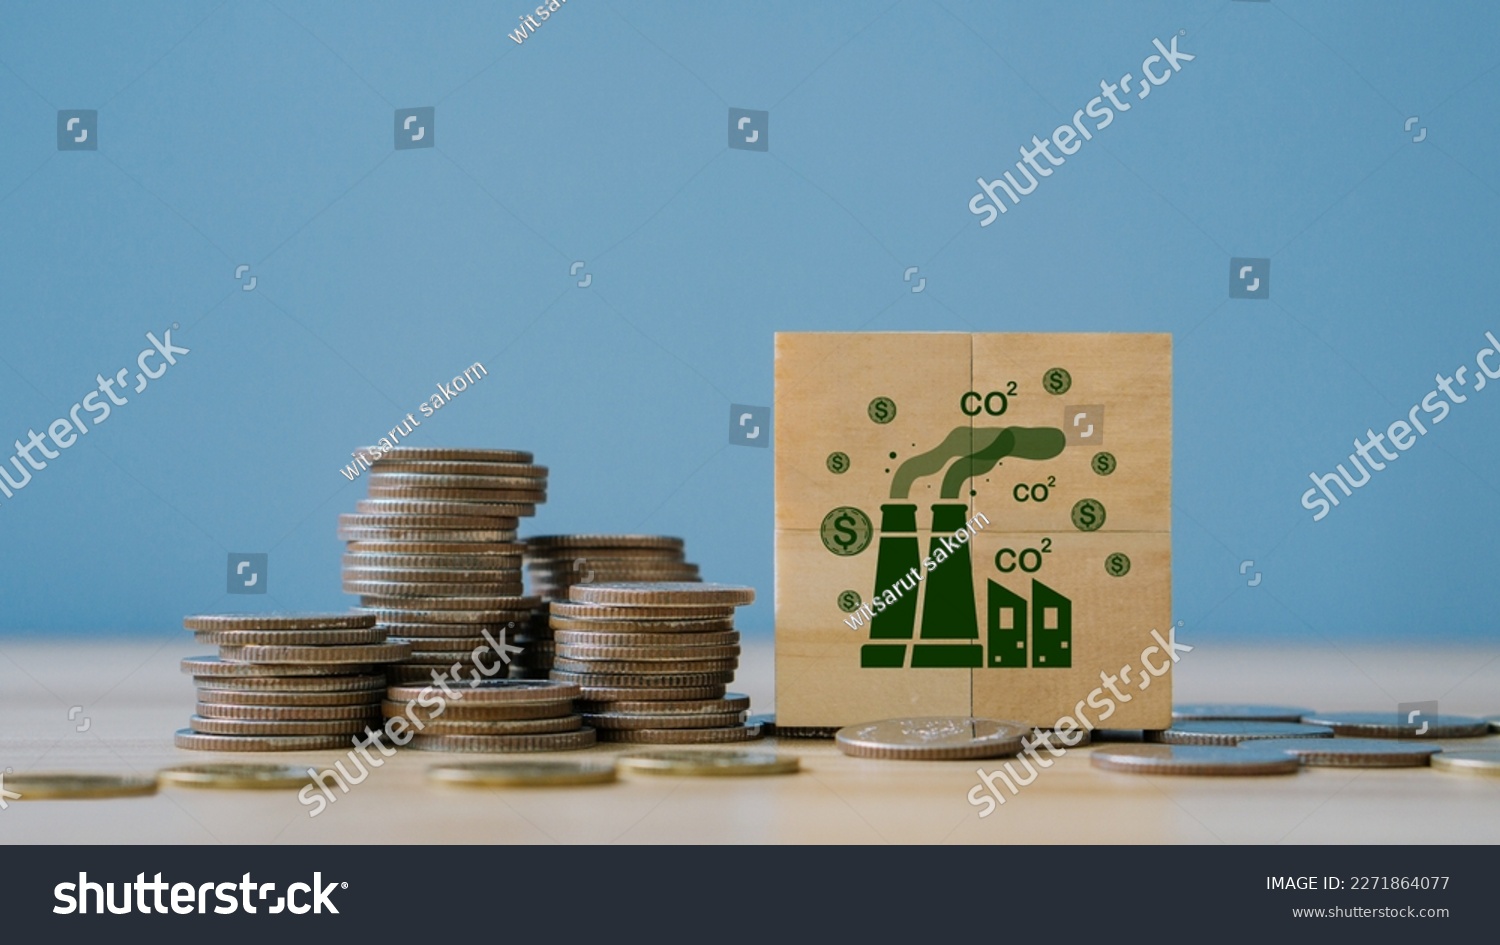 Concept of green Co2 Tax.Carbon tax, environmental and social responsibility business concept. Taxation for nature pollution.Wooden cubes with CO2 TAX word and stack coin. #2271864077